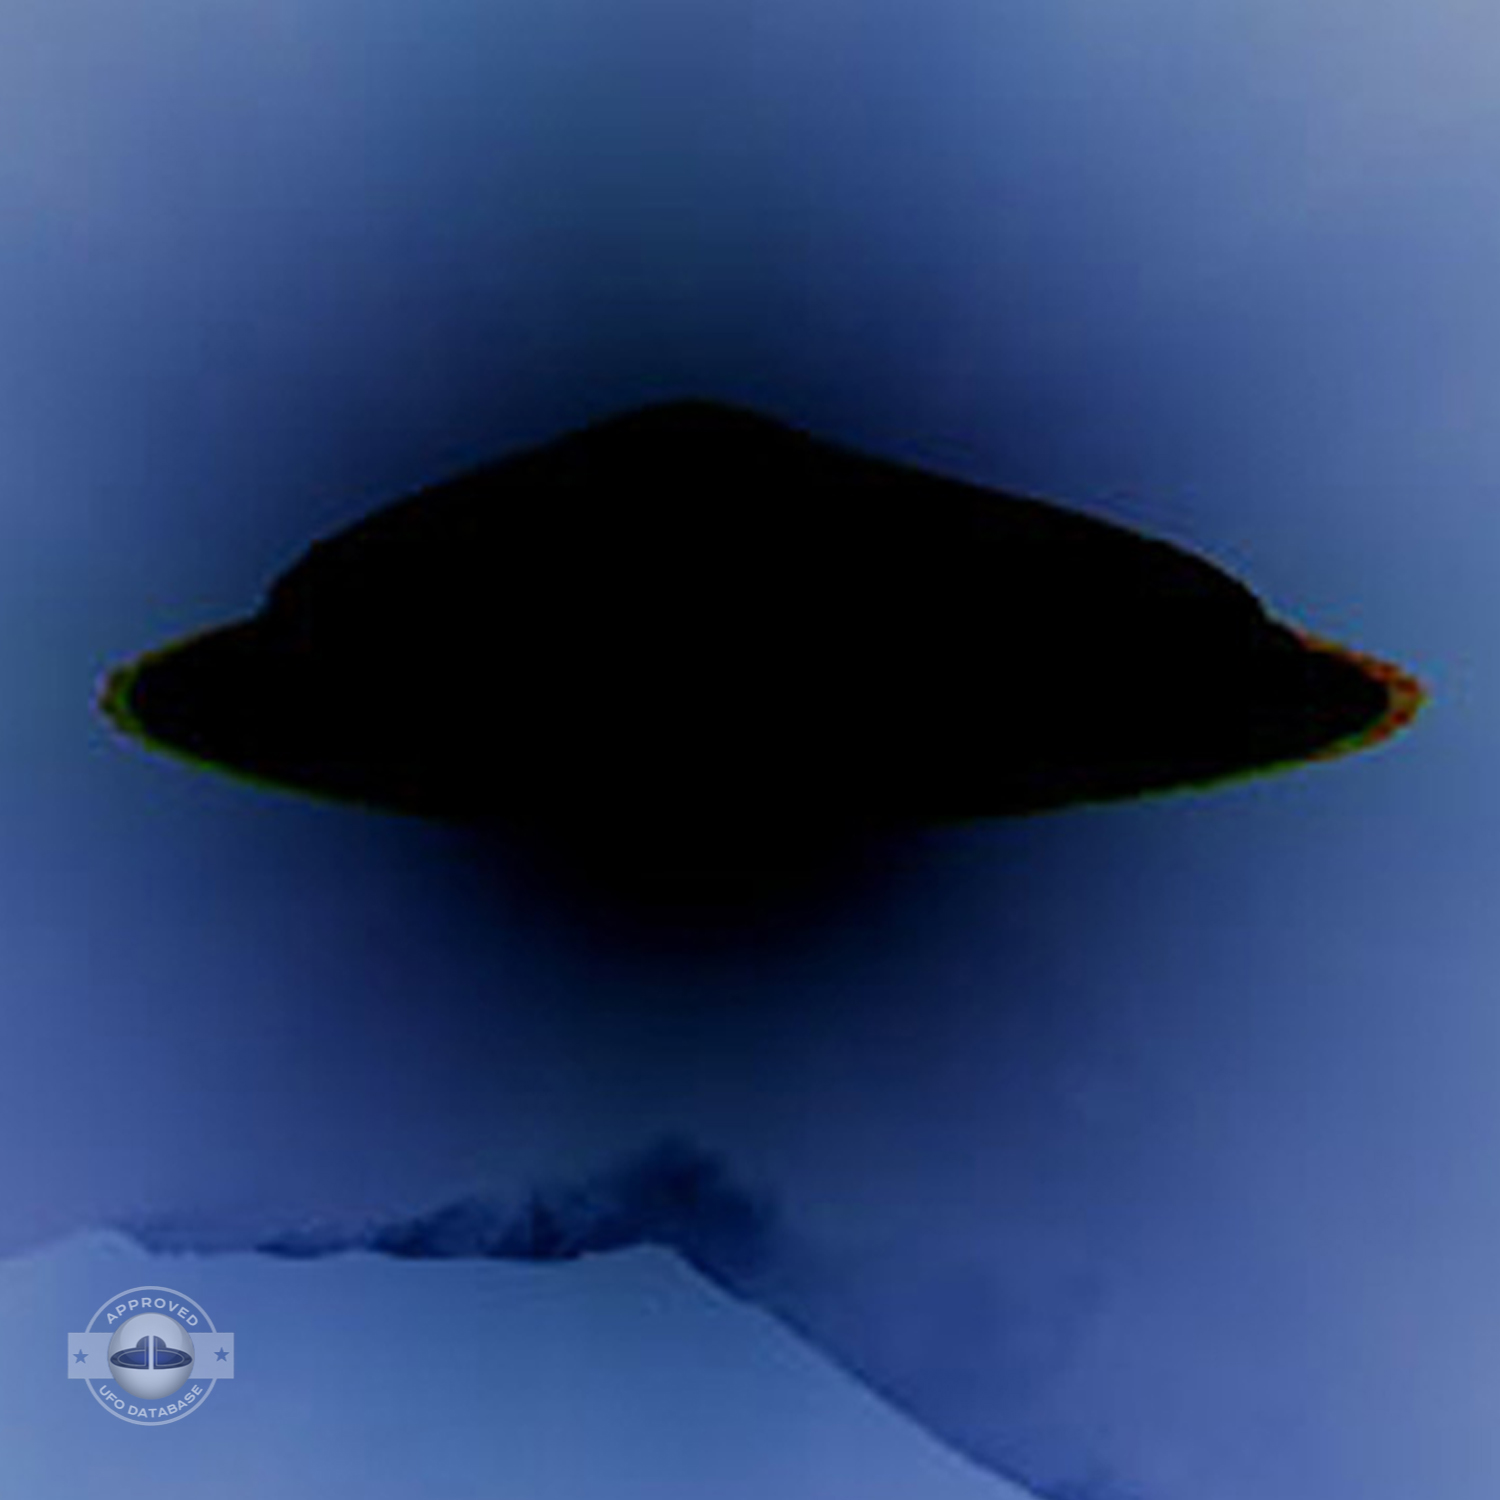 Gigantic bright glowing UFO mother ship over Mount Fuji | Japan | 2006 UFO Picture #227-4